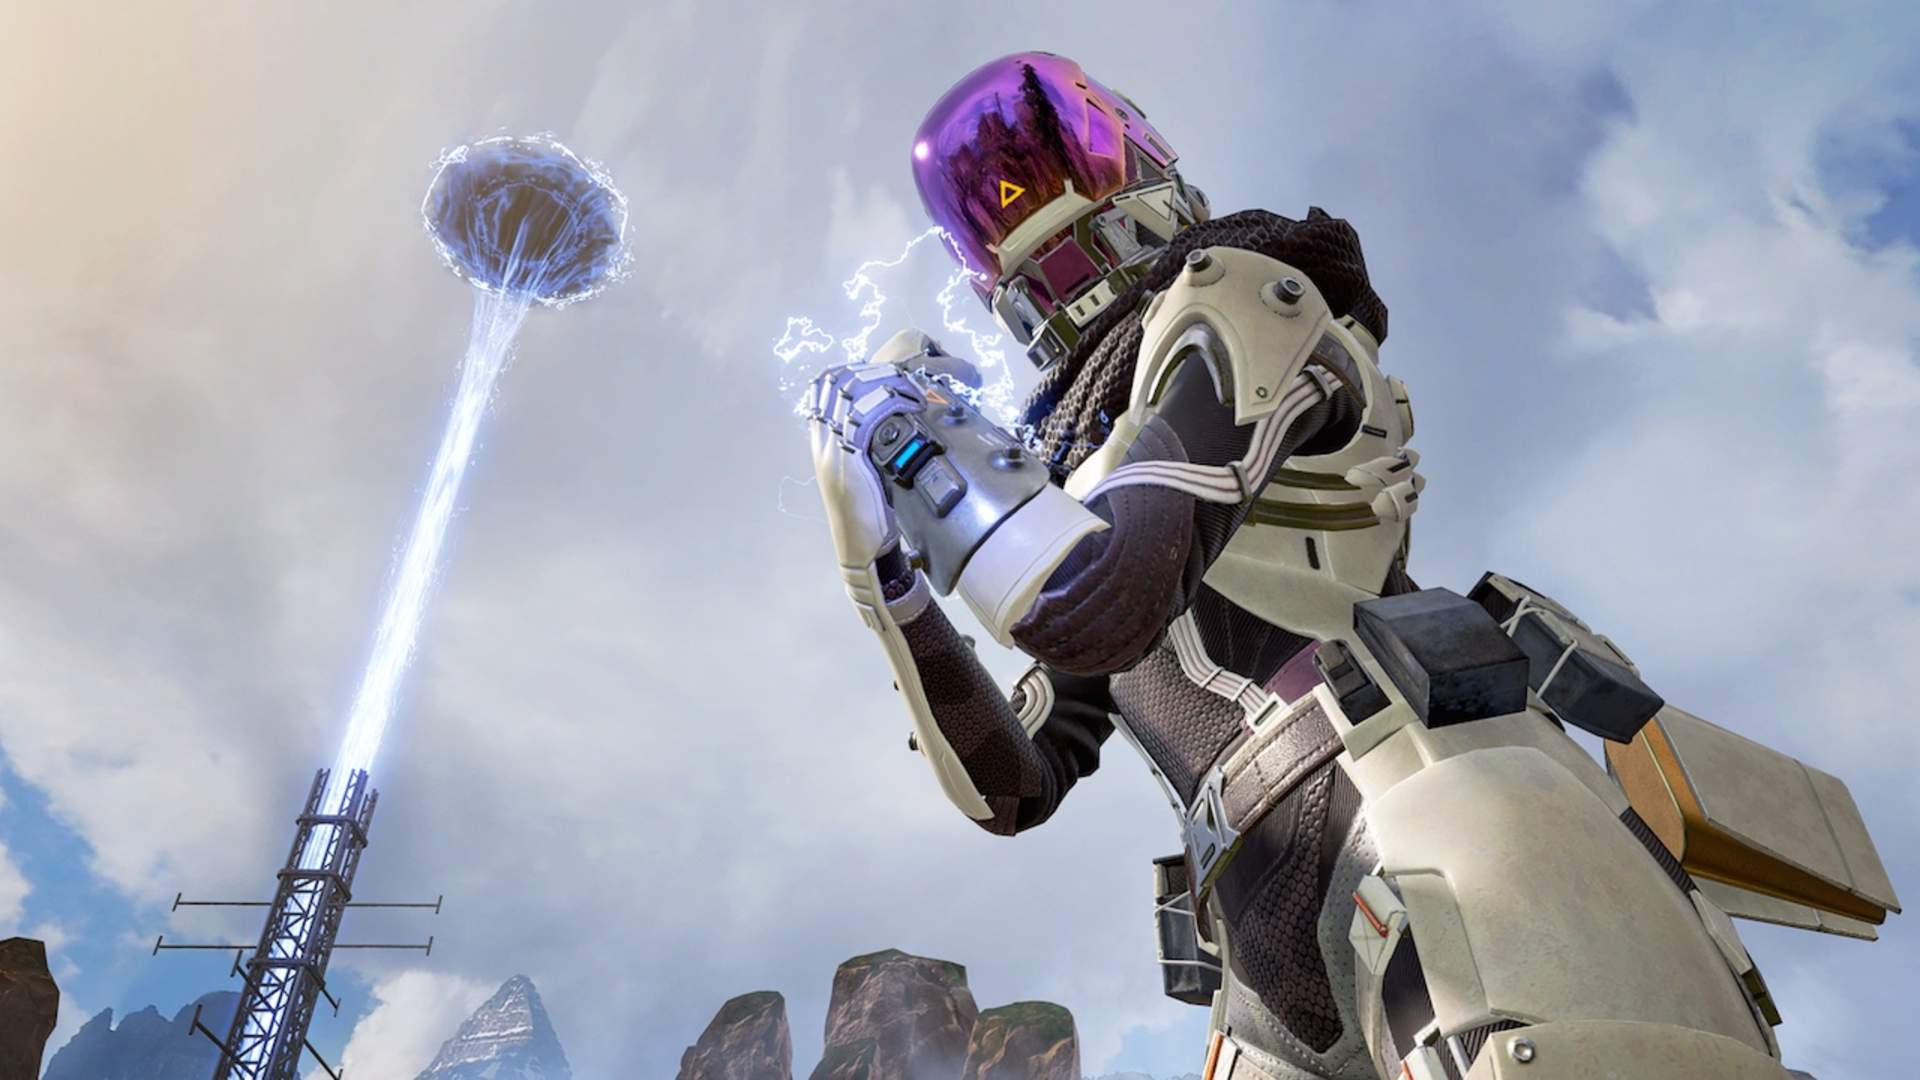 Apex Legends' Wraith Themed Voidwalker Event Will Bring New Lore